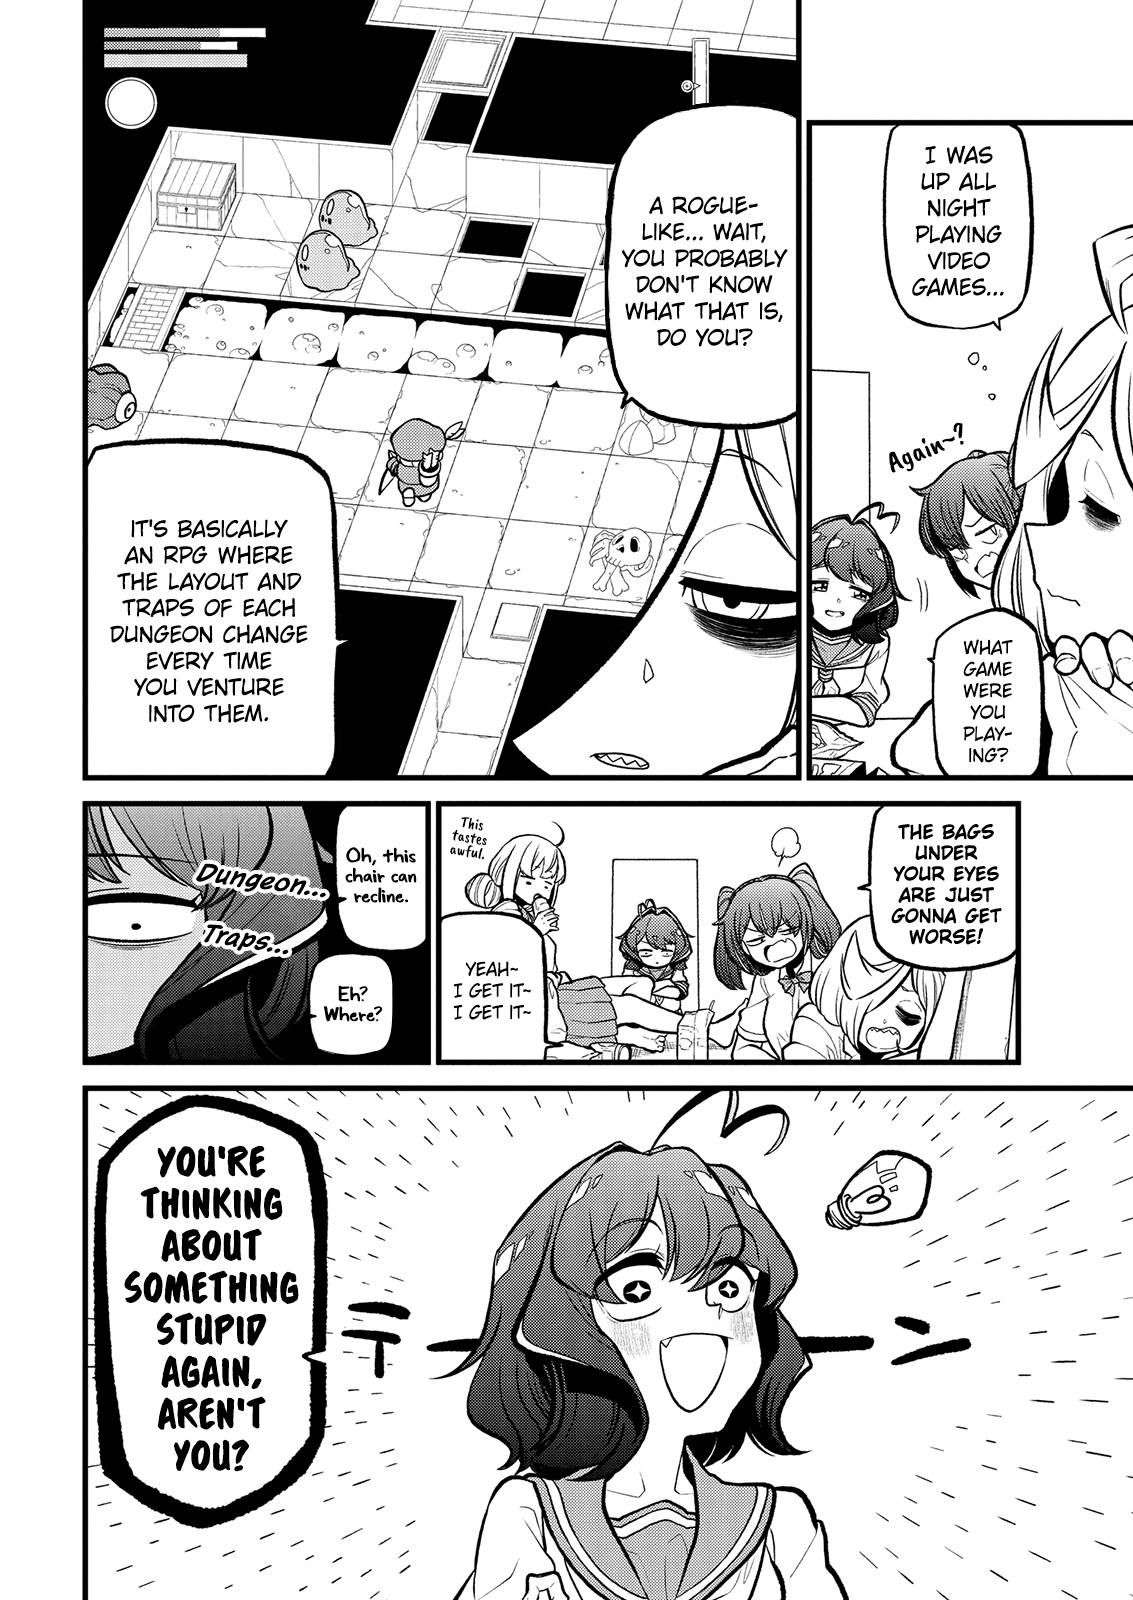 Gushing over Magical Girls - chapter 28 - #2